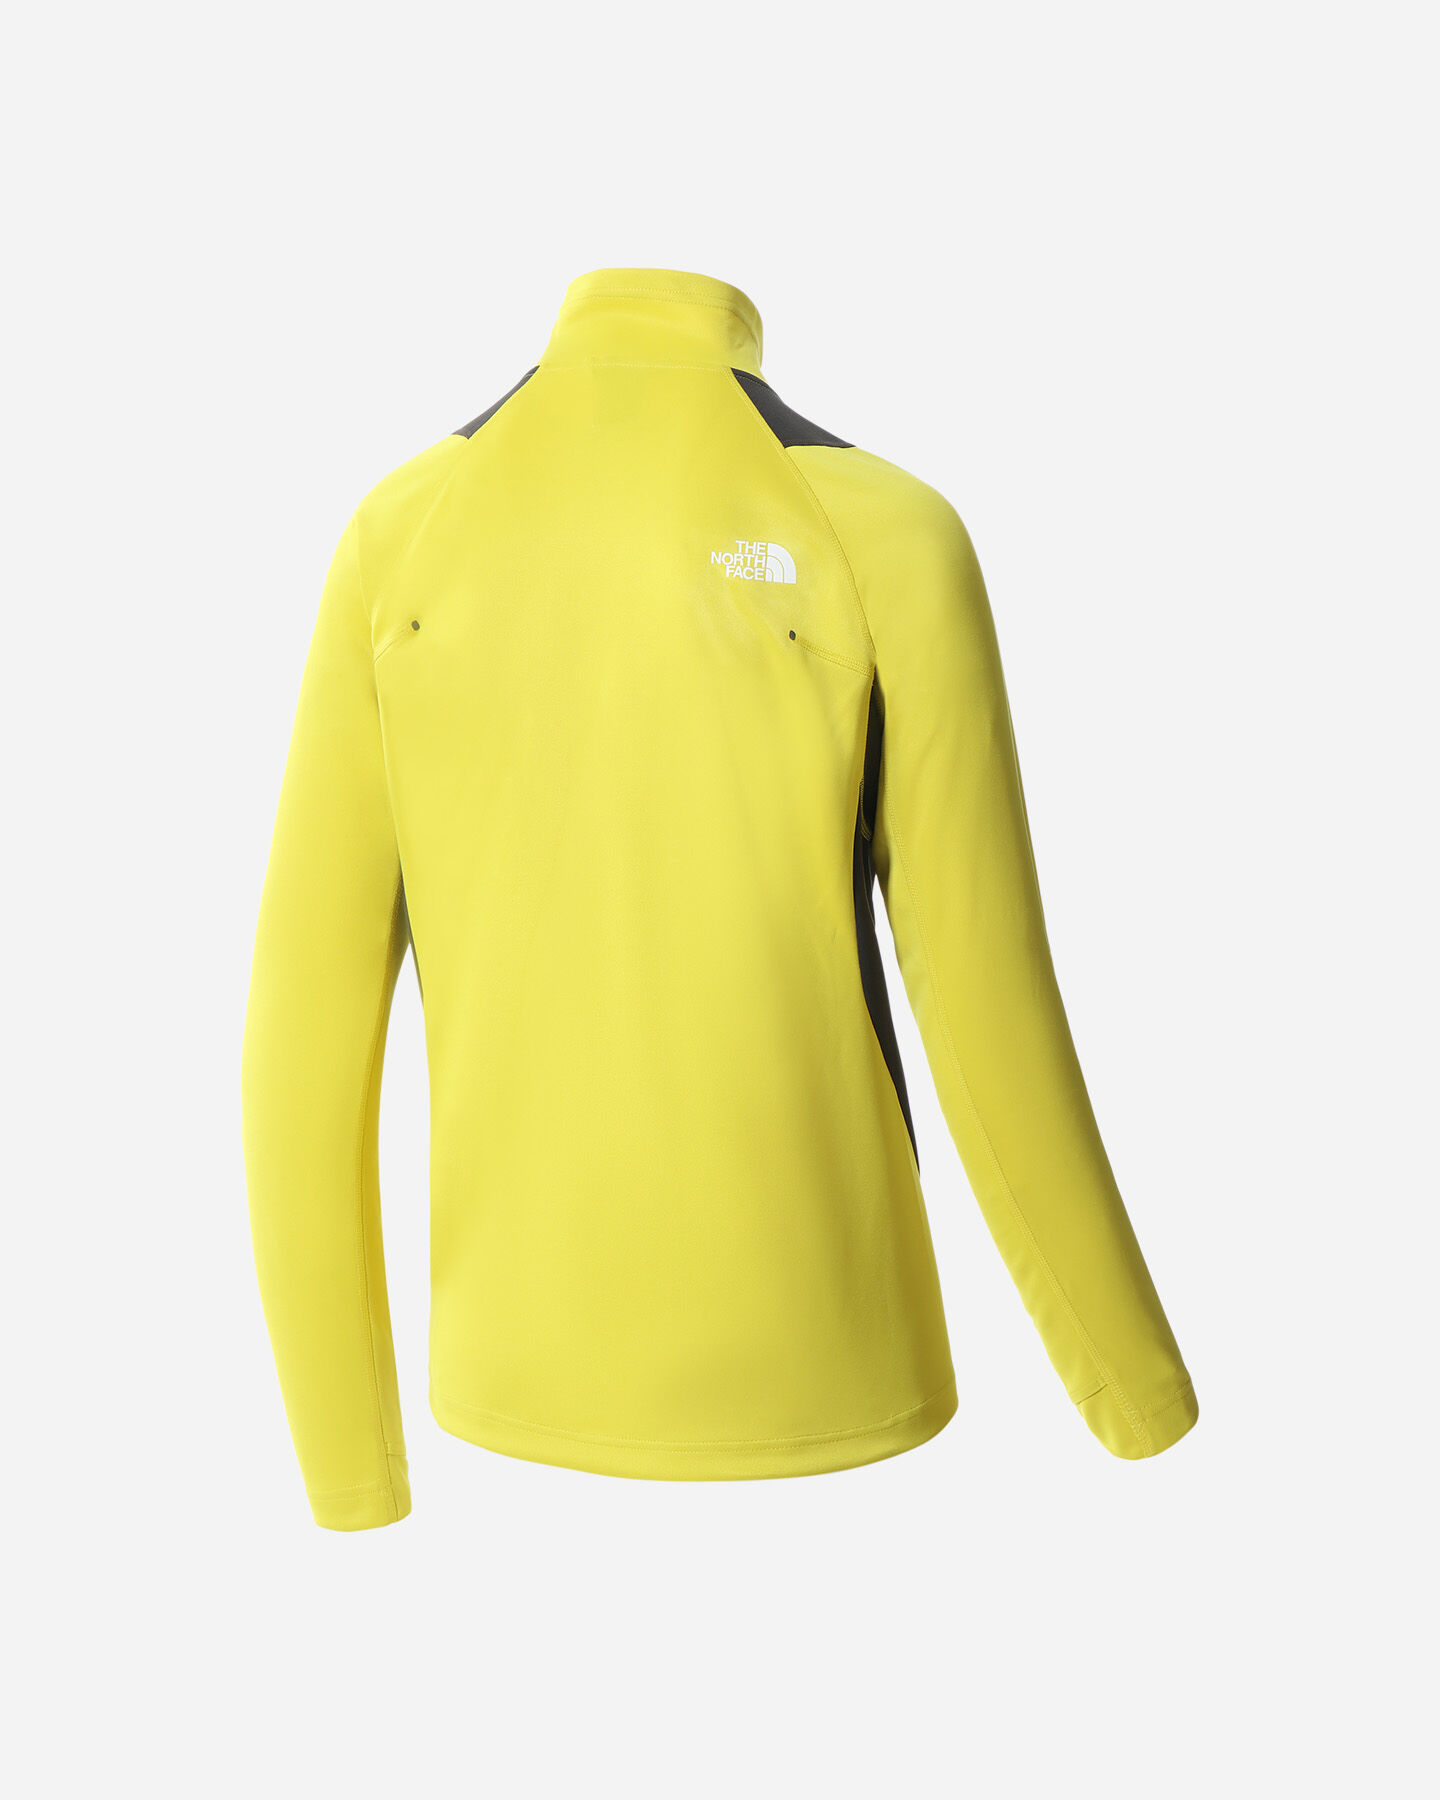  Pile THE NORTH FACE FULL ZIP MIDLAYER M S5423236|W8B|XL scatto 1